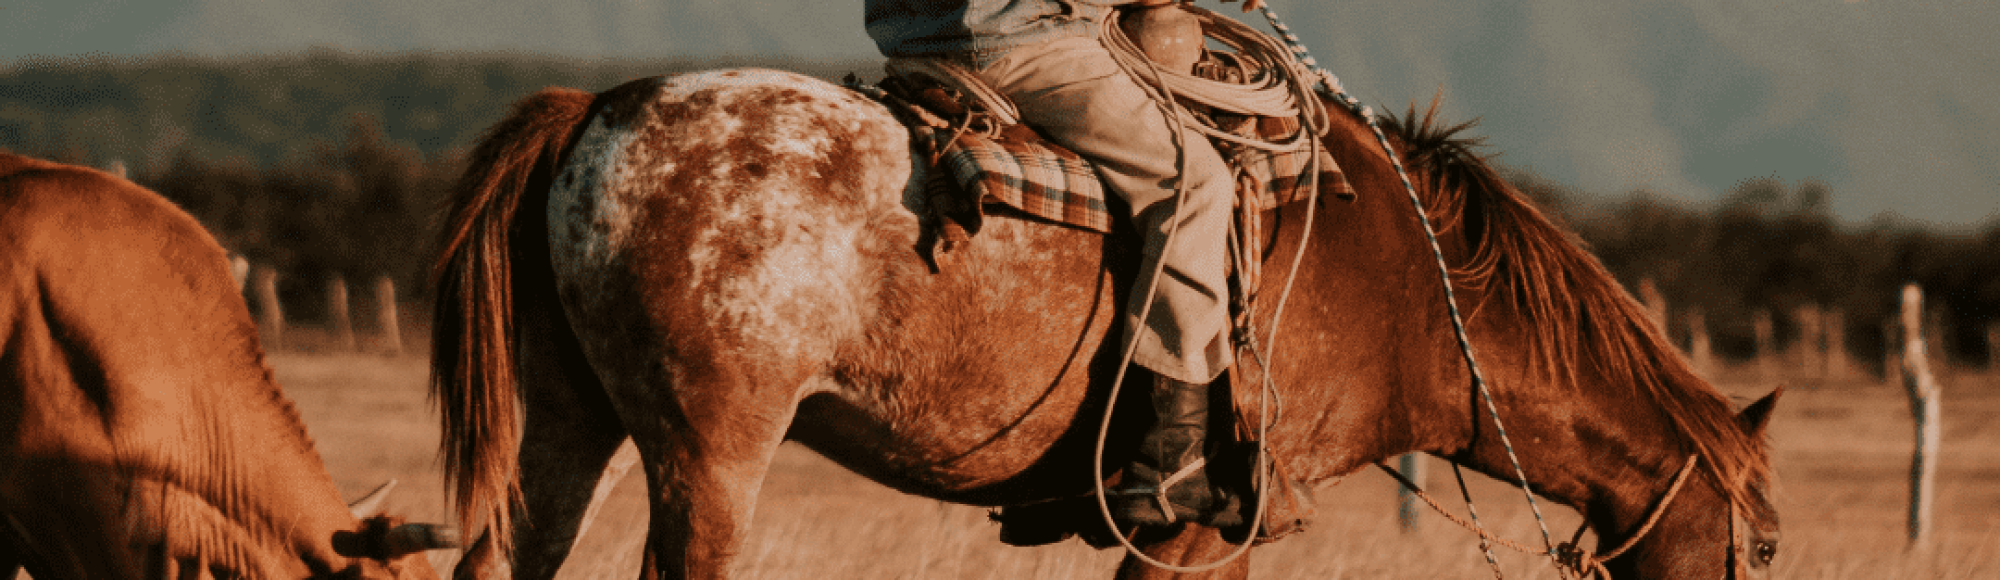 Appaloosa Horse herding cattle with cowboy in the united states of america